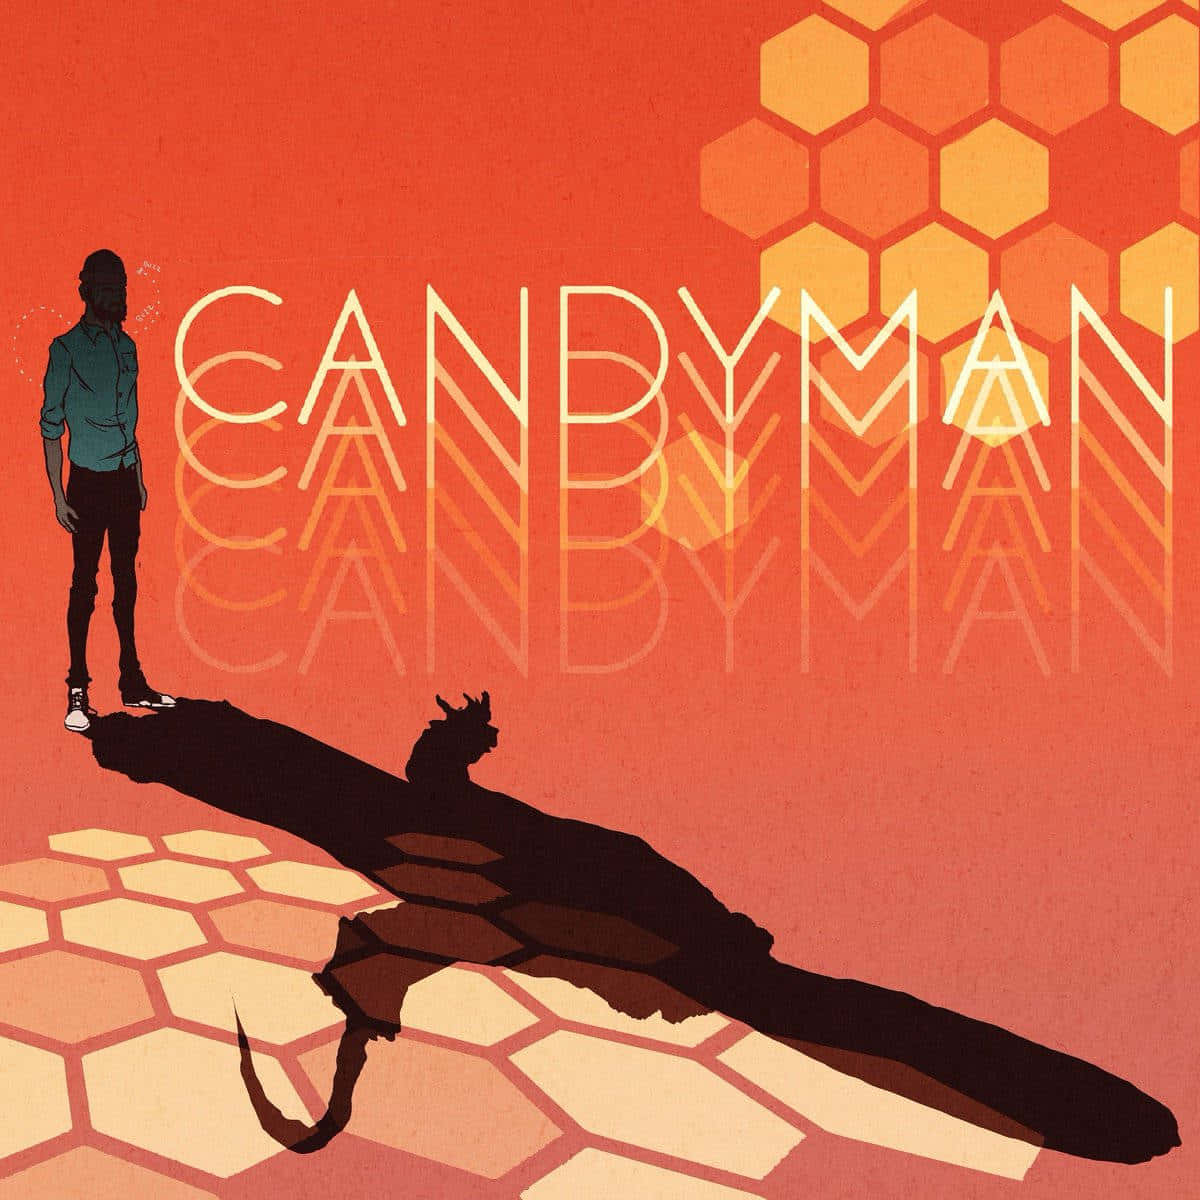 "The Horror of Candyman Lives On"